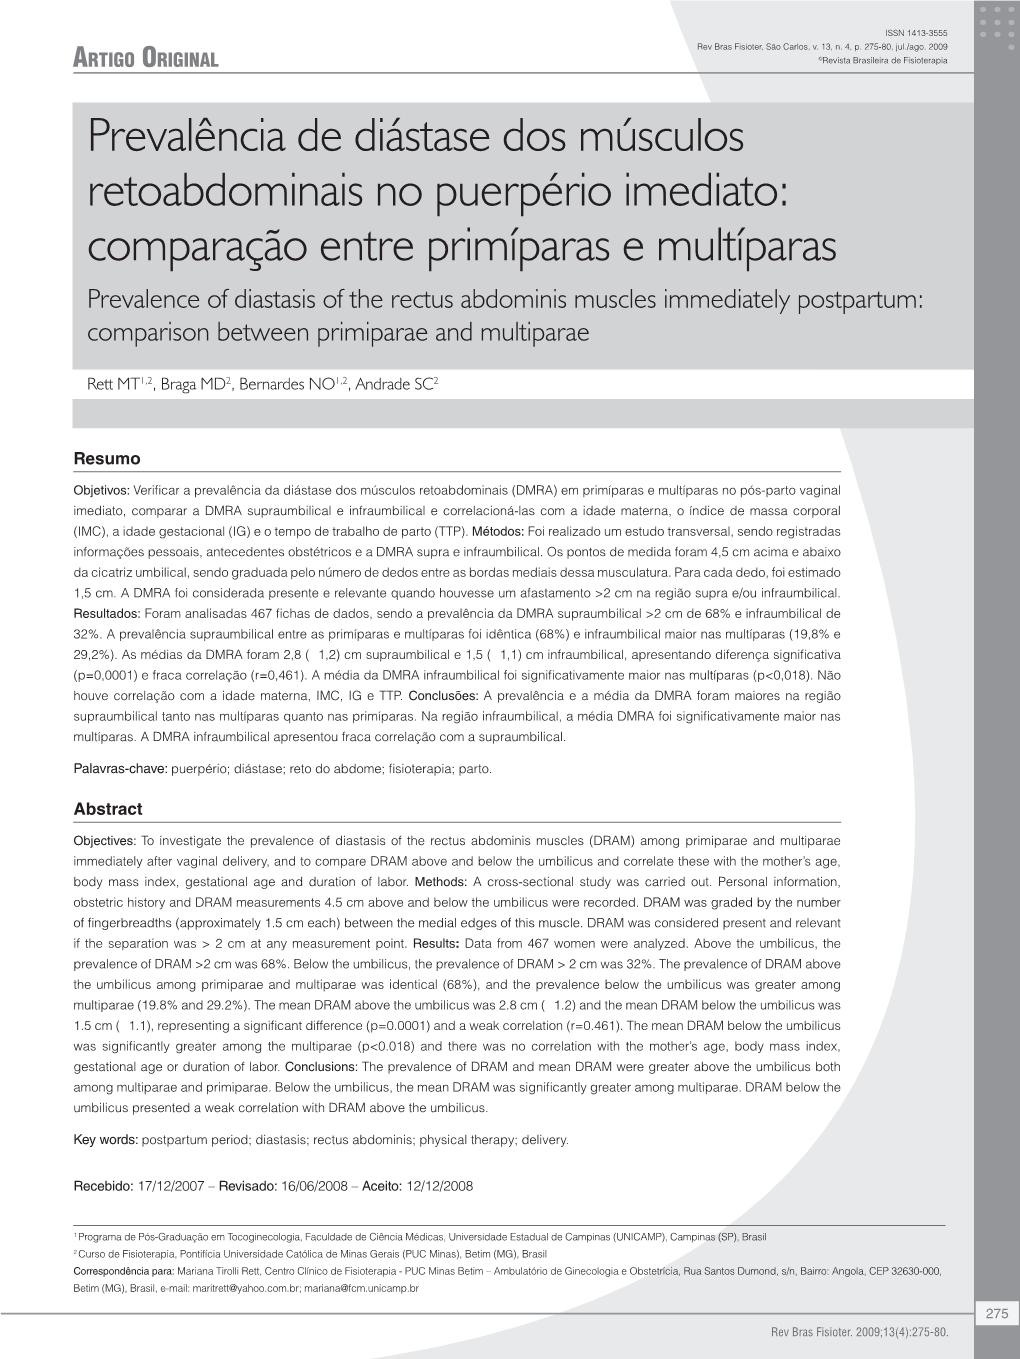 Prevalence of Diastasis of the Rectus Abdominis Muscles Immediately Postpartum: Comparison Between Primiparae and Multiparae